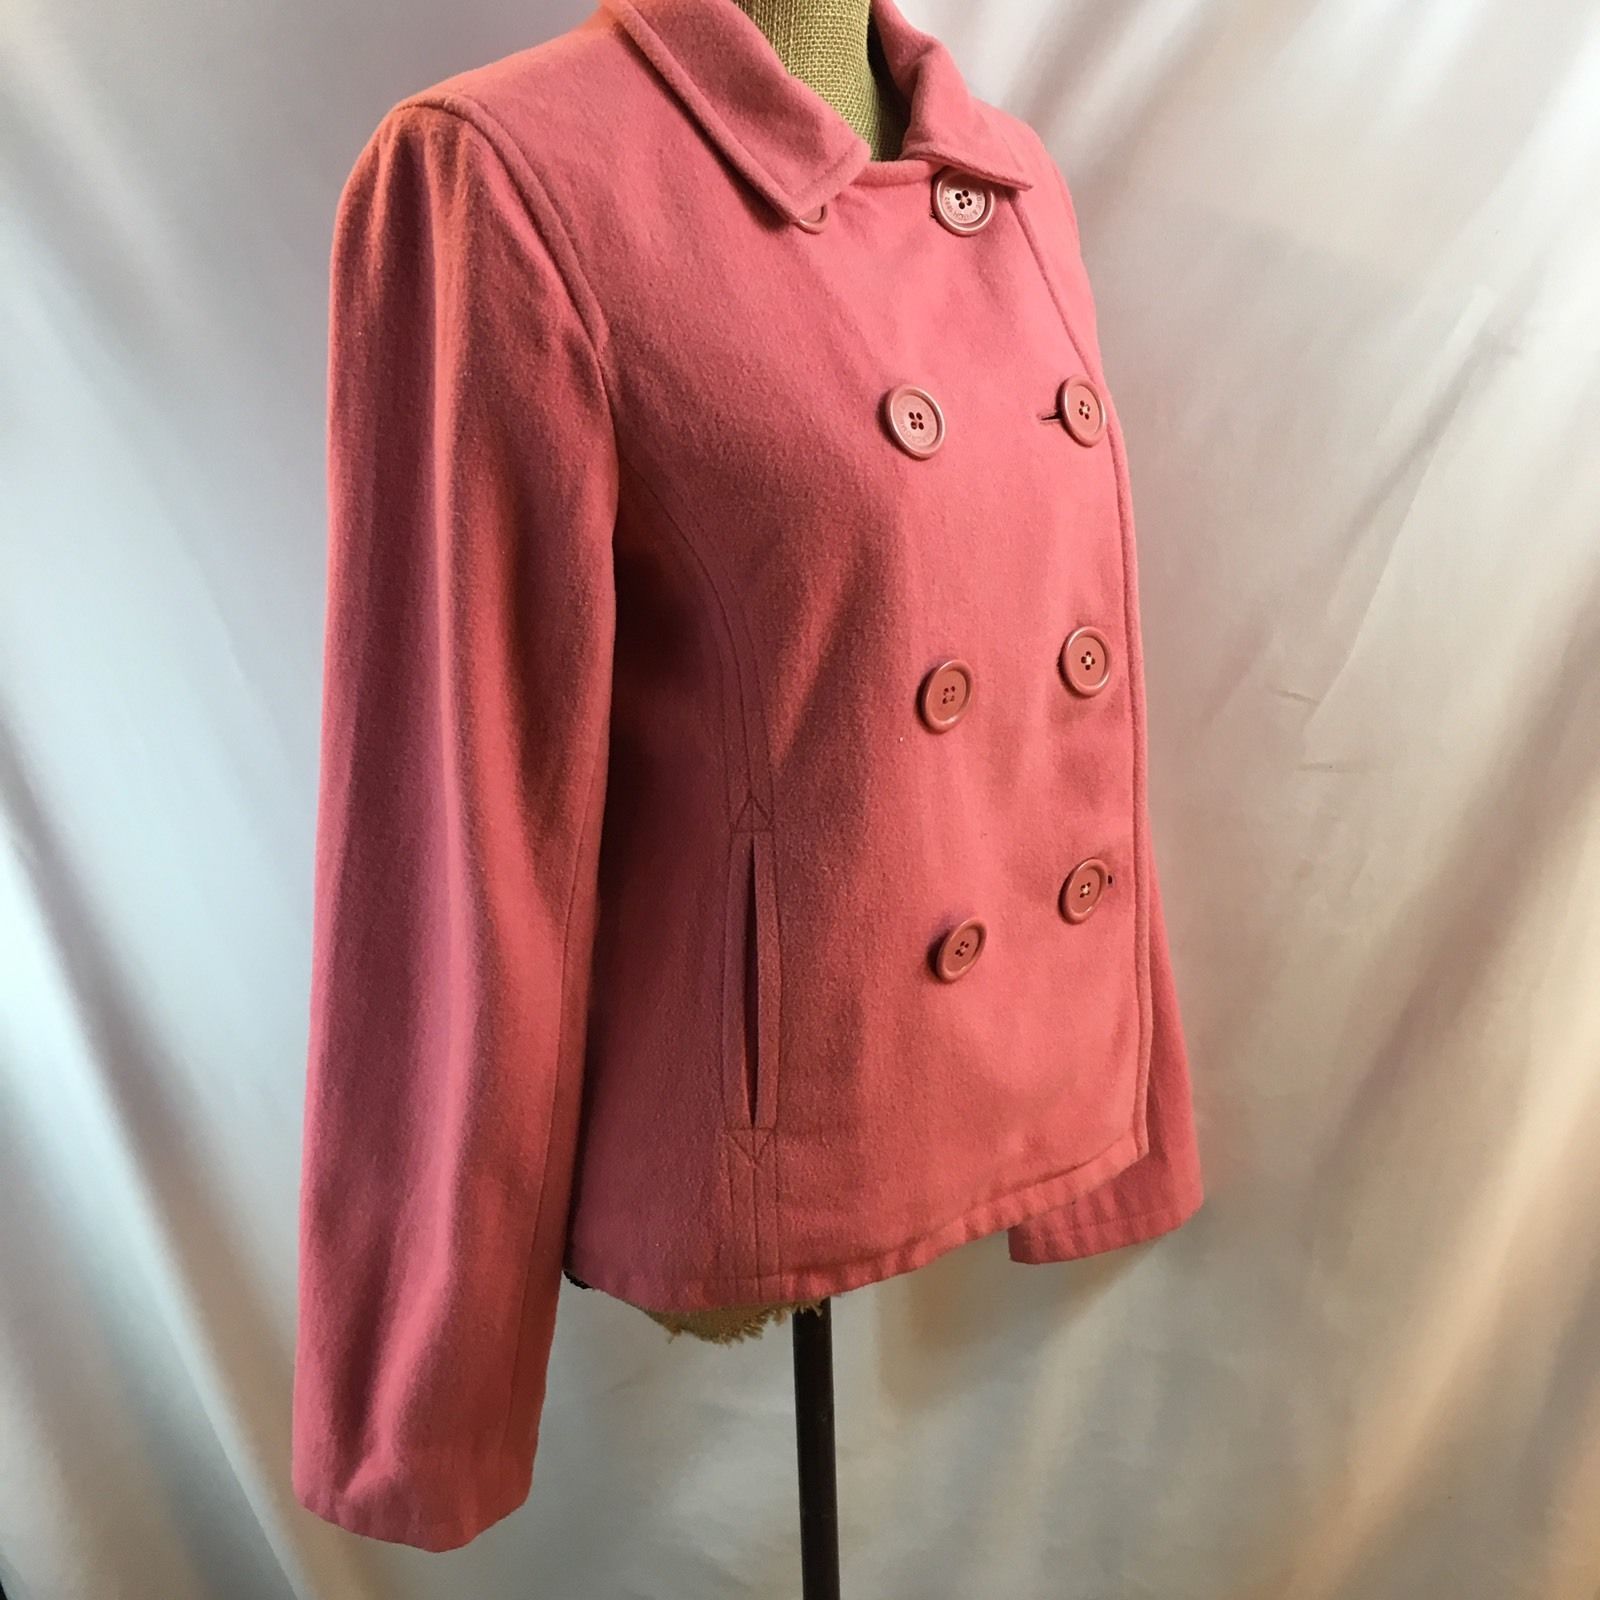 Abercrombie & Fitch Pink East Coast Vintage Pea Coat Wool Blend Lined ...